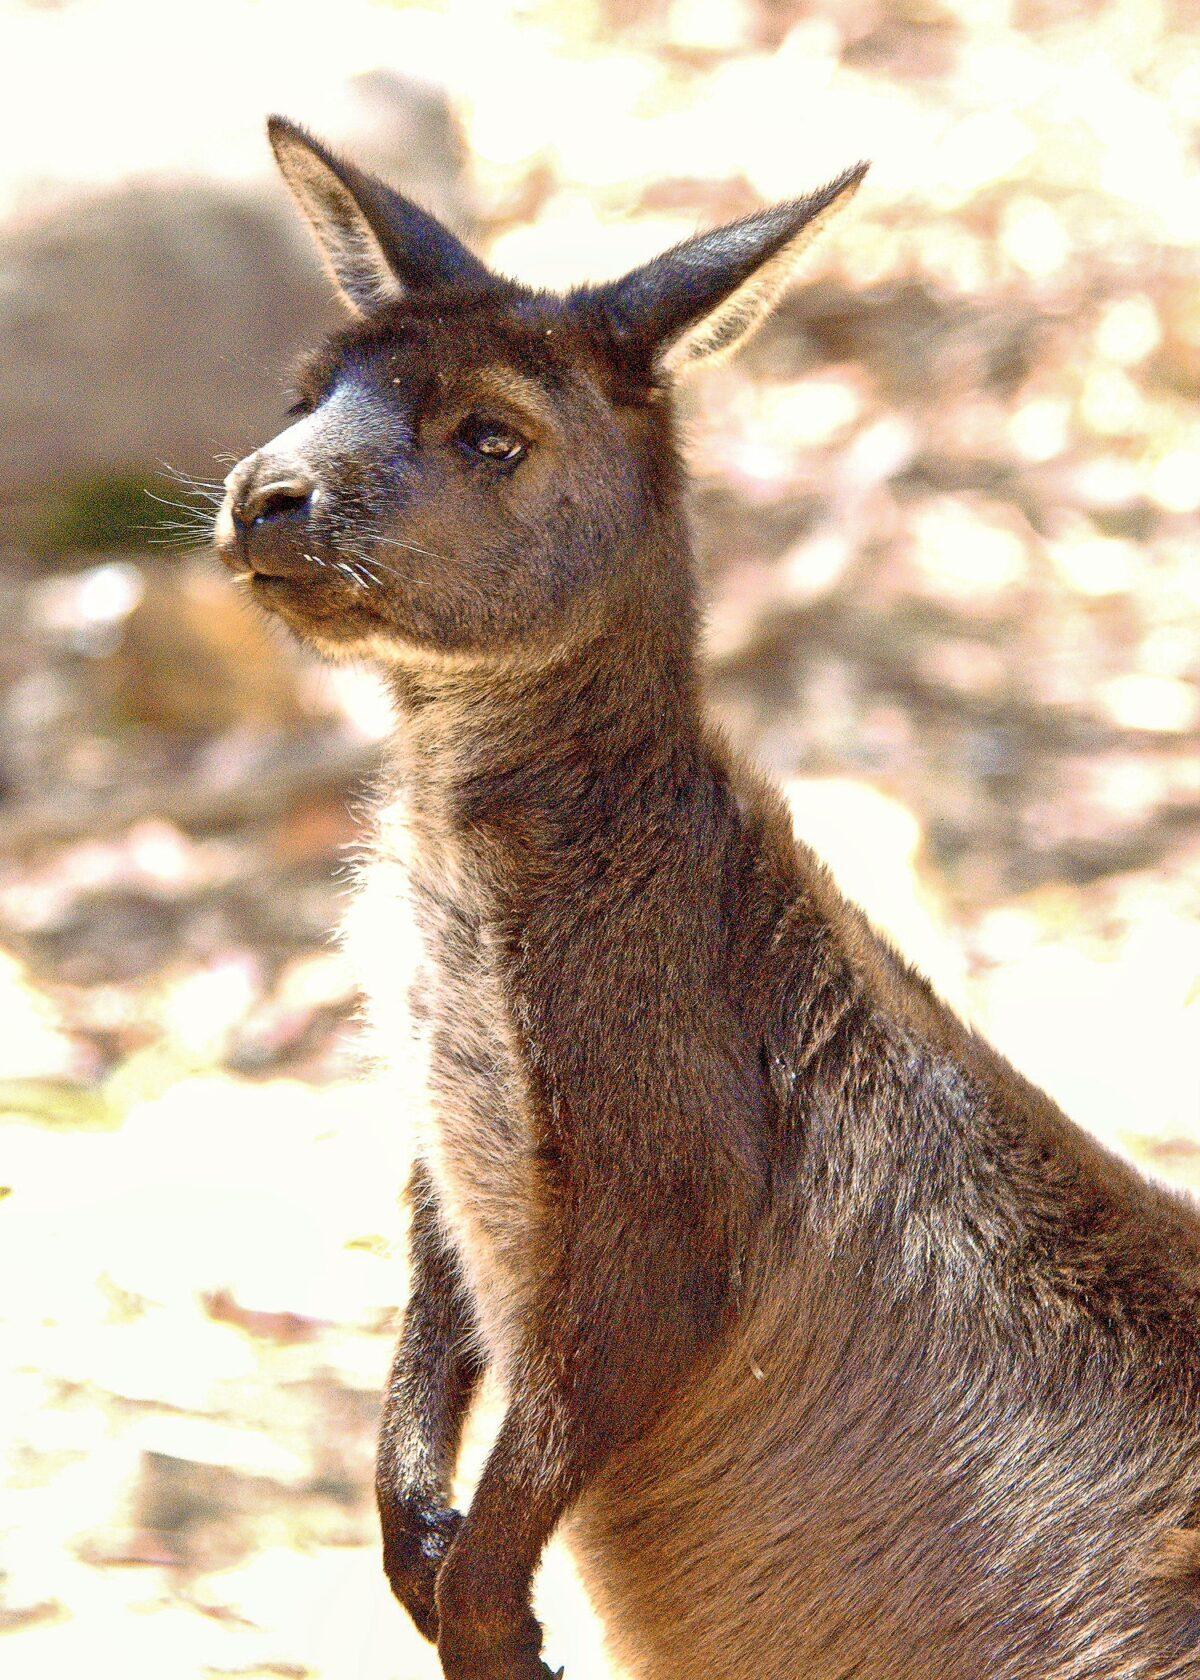 The Kangaroo is the only large animal that hops to get from place to place. They can cover 15 feet in a single hop, hop a long as fast as 30 miles per hour and cruise at about 20 miles per hour. (Fred J. Eckert)